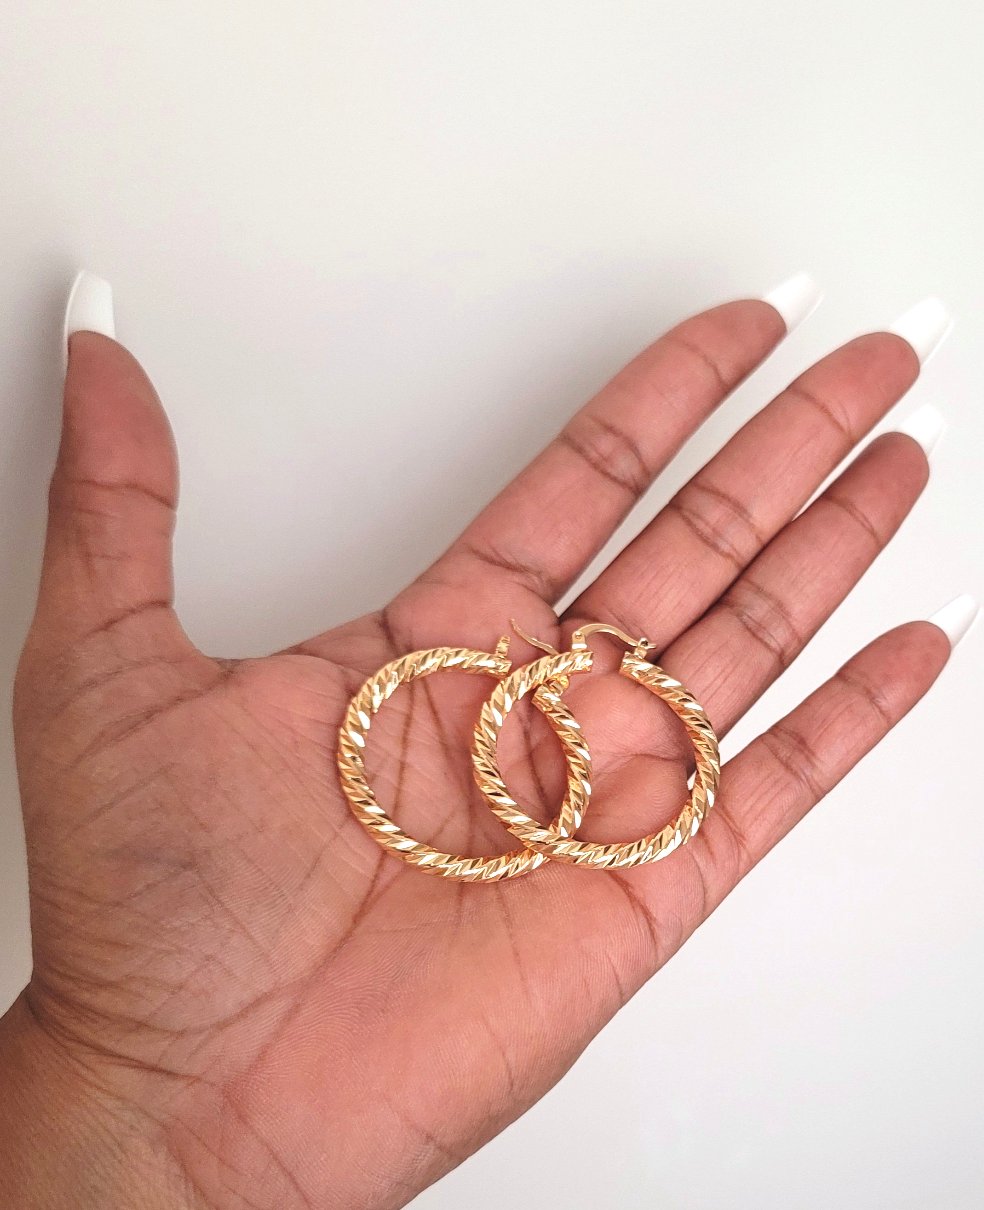 Engraved gold Hoops